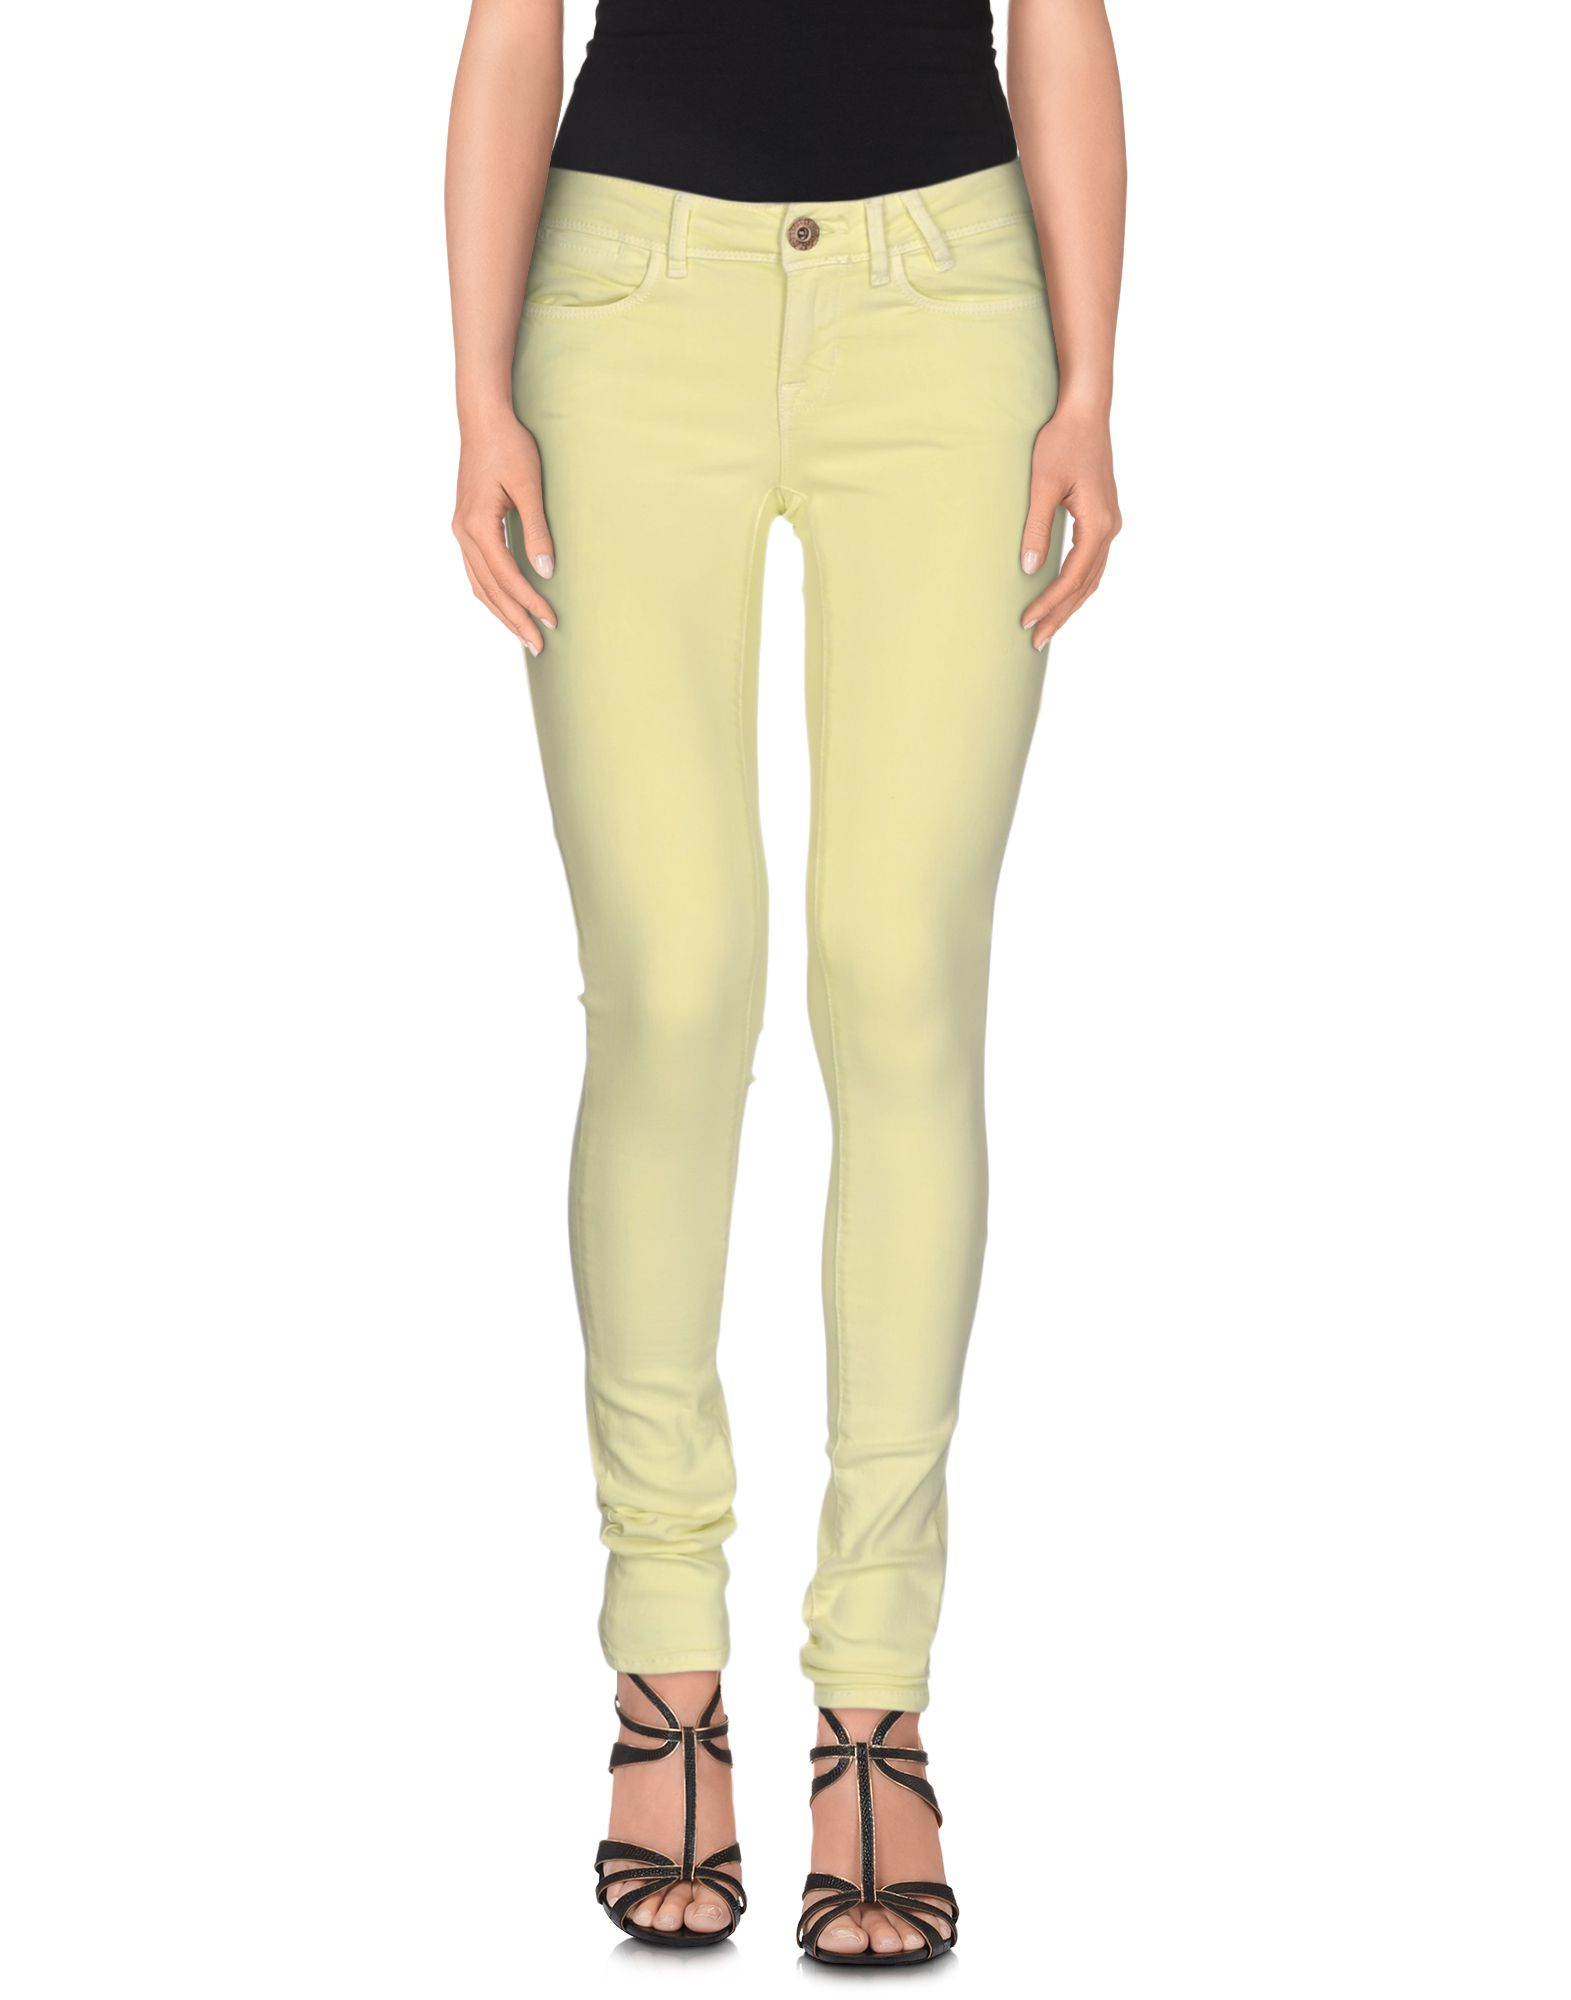 Guess Denim Pants in Yellow | Lyst